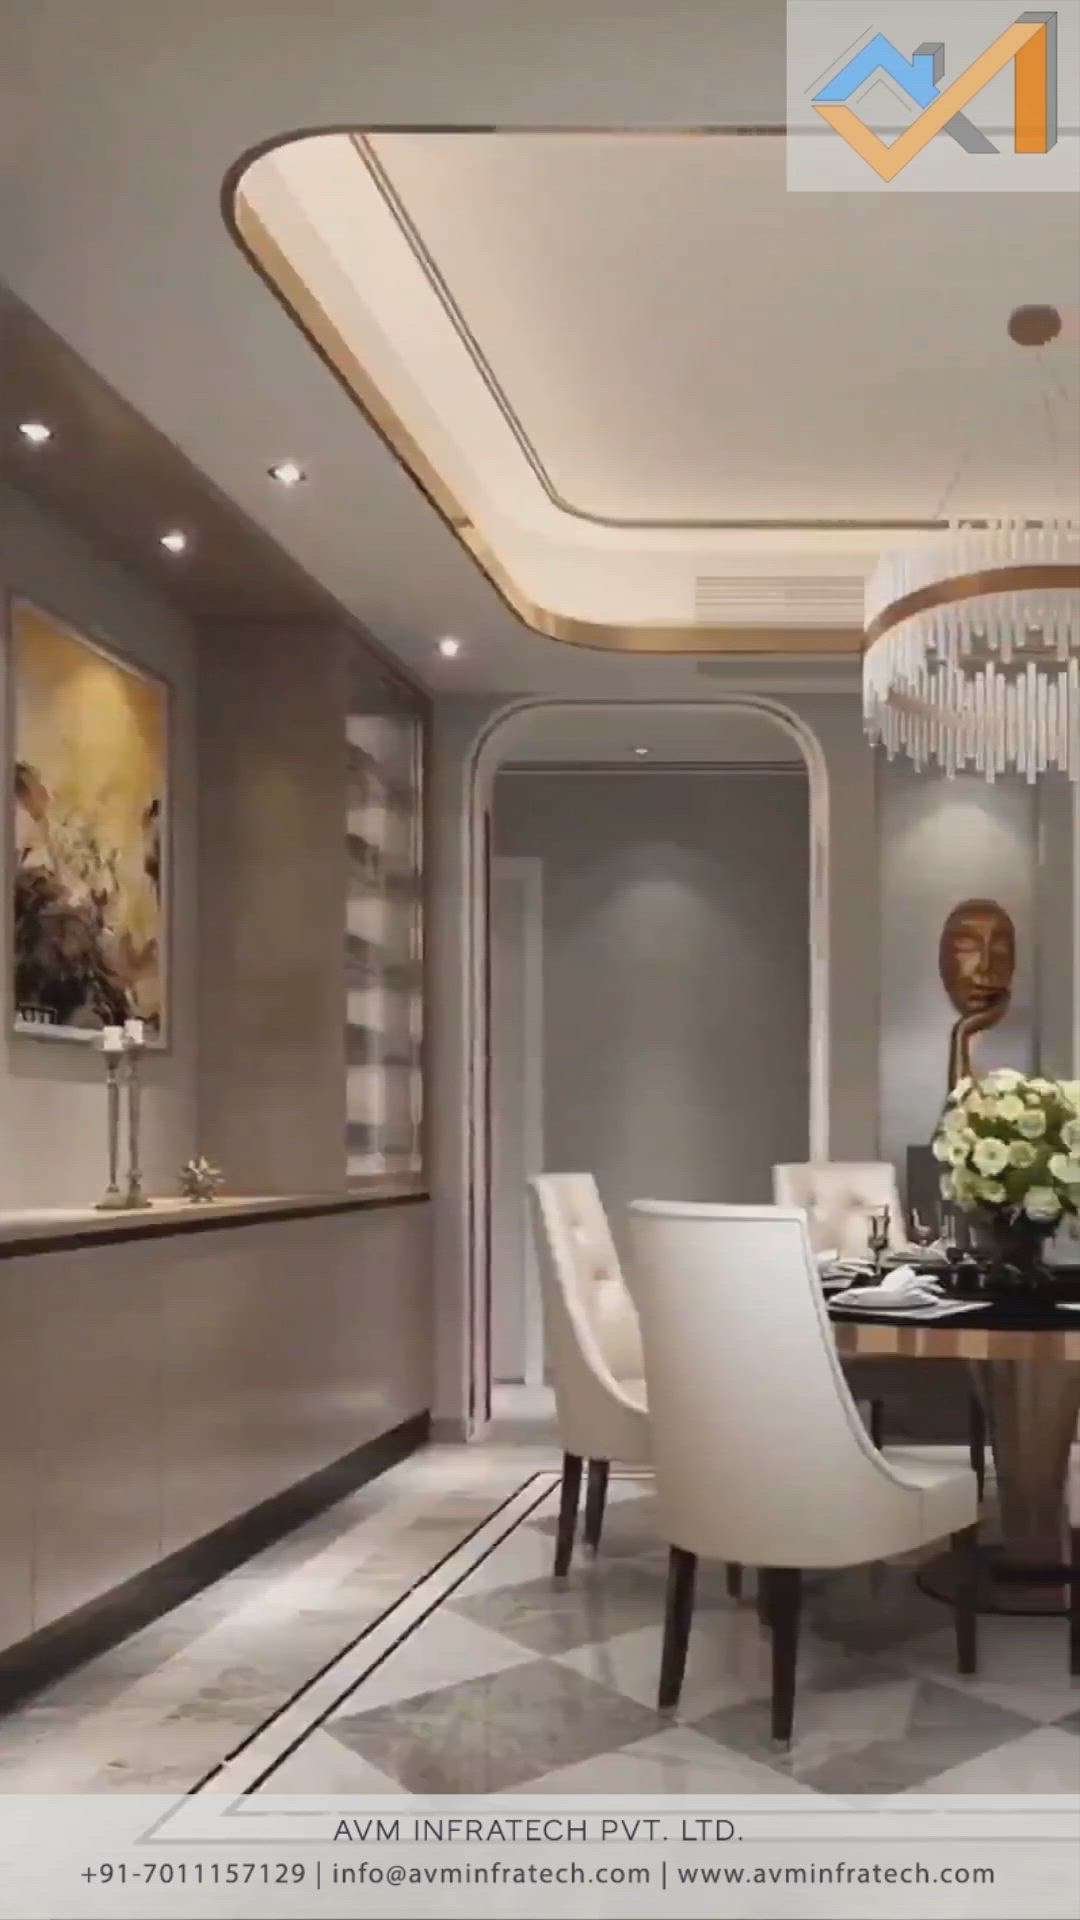 Astonishing dining room sets and luxury products that inspire conversations are all elements that make an alluring dining environment.


Follow us for more such amazing updates. 
.
.
#astonishing #diningtable #diningroom #luxury #luxurylife #product #inspire #conversation #elements #bedroomdecor #decor #decoration #architect #architecture #interior #interiordesign #designer